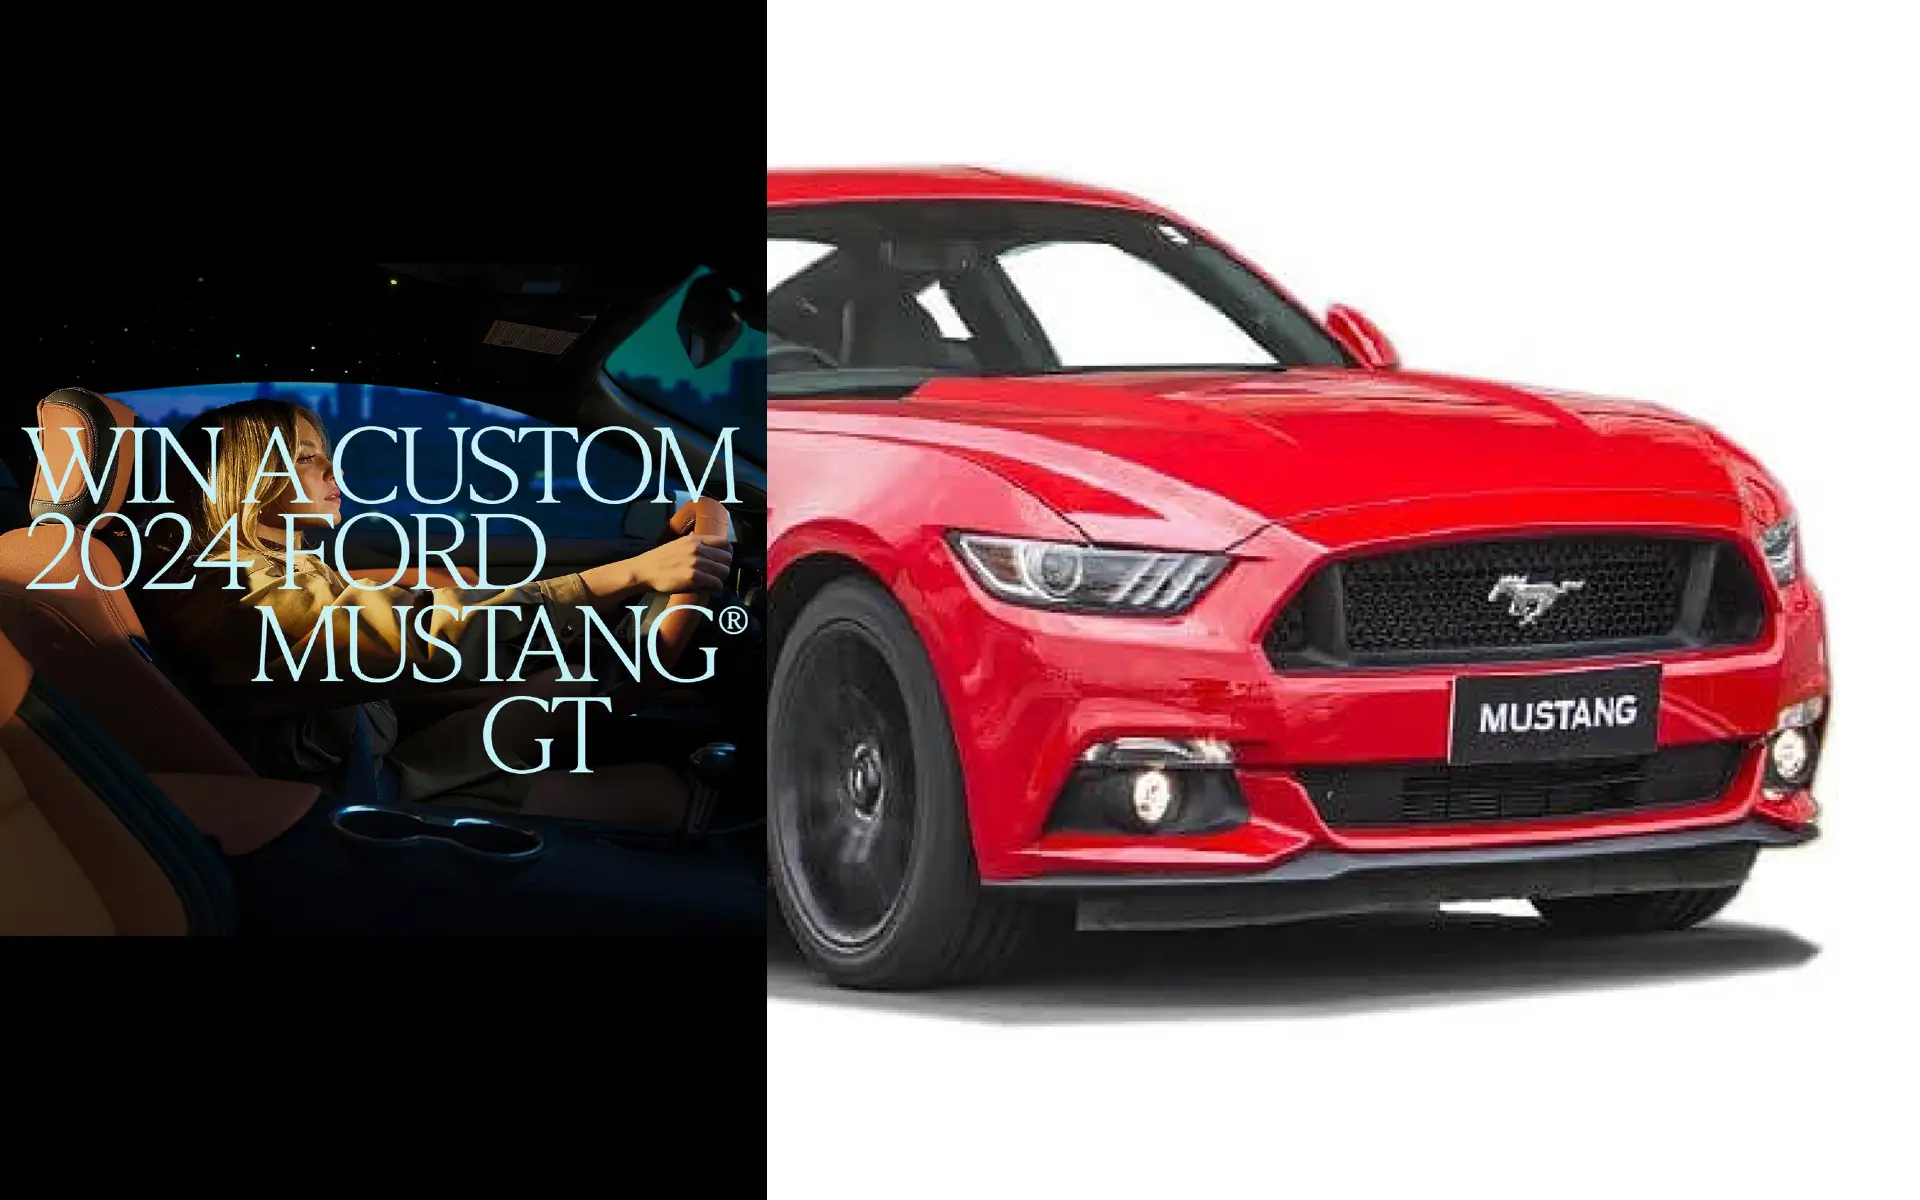 Sydney Sweeney’s Custom Designed Ford Mustang GT Giveaway